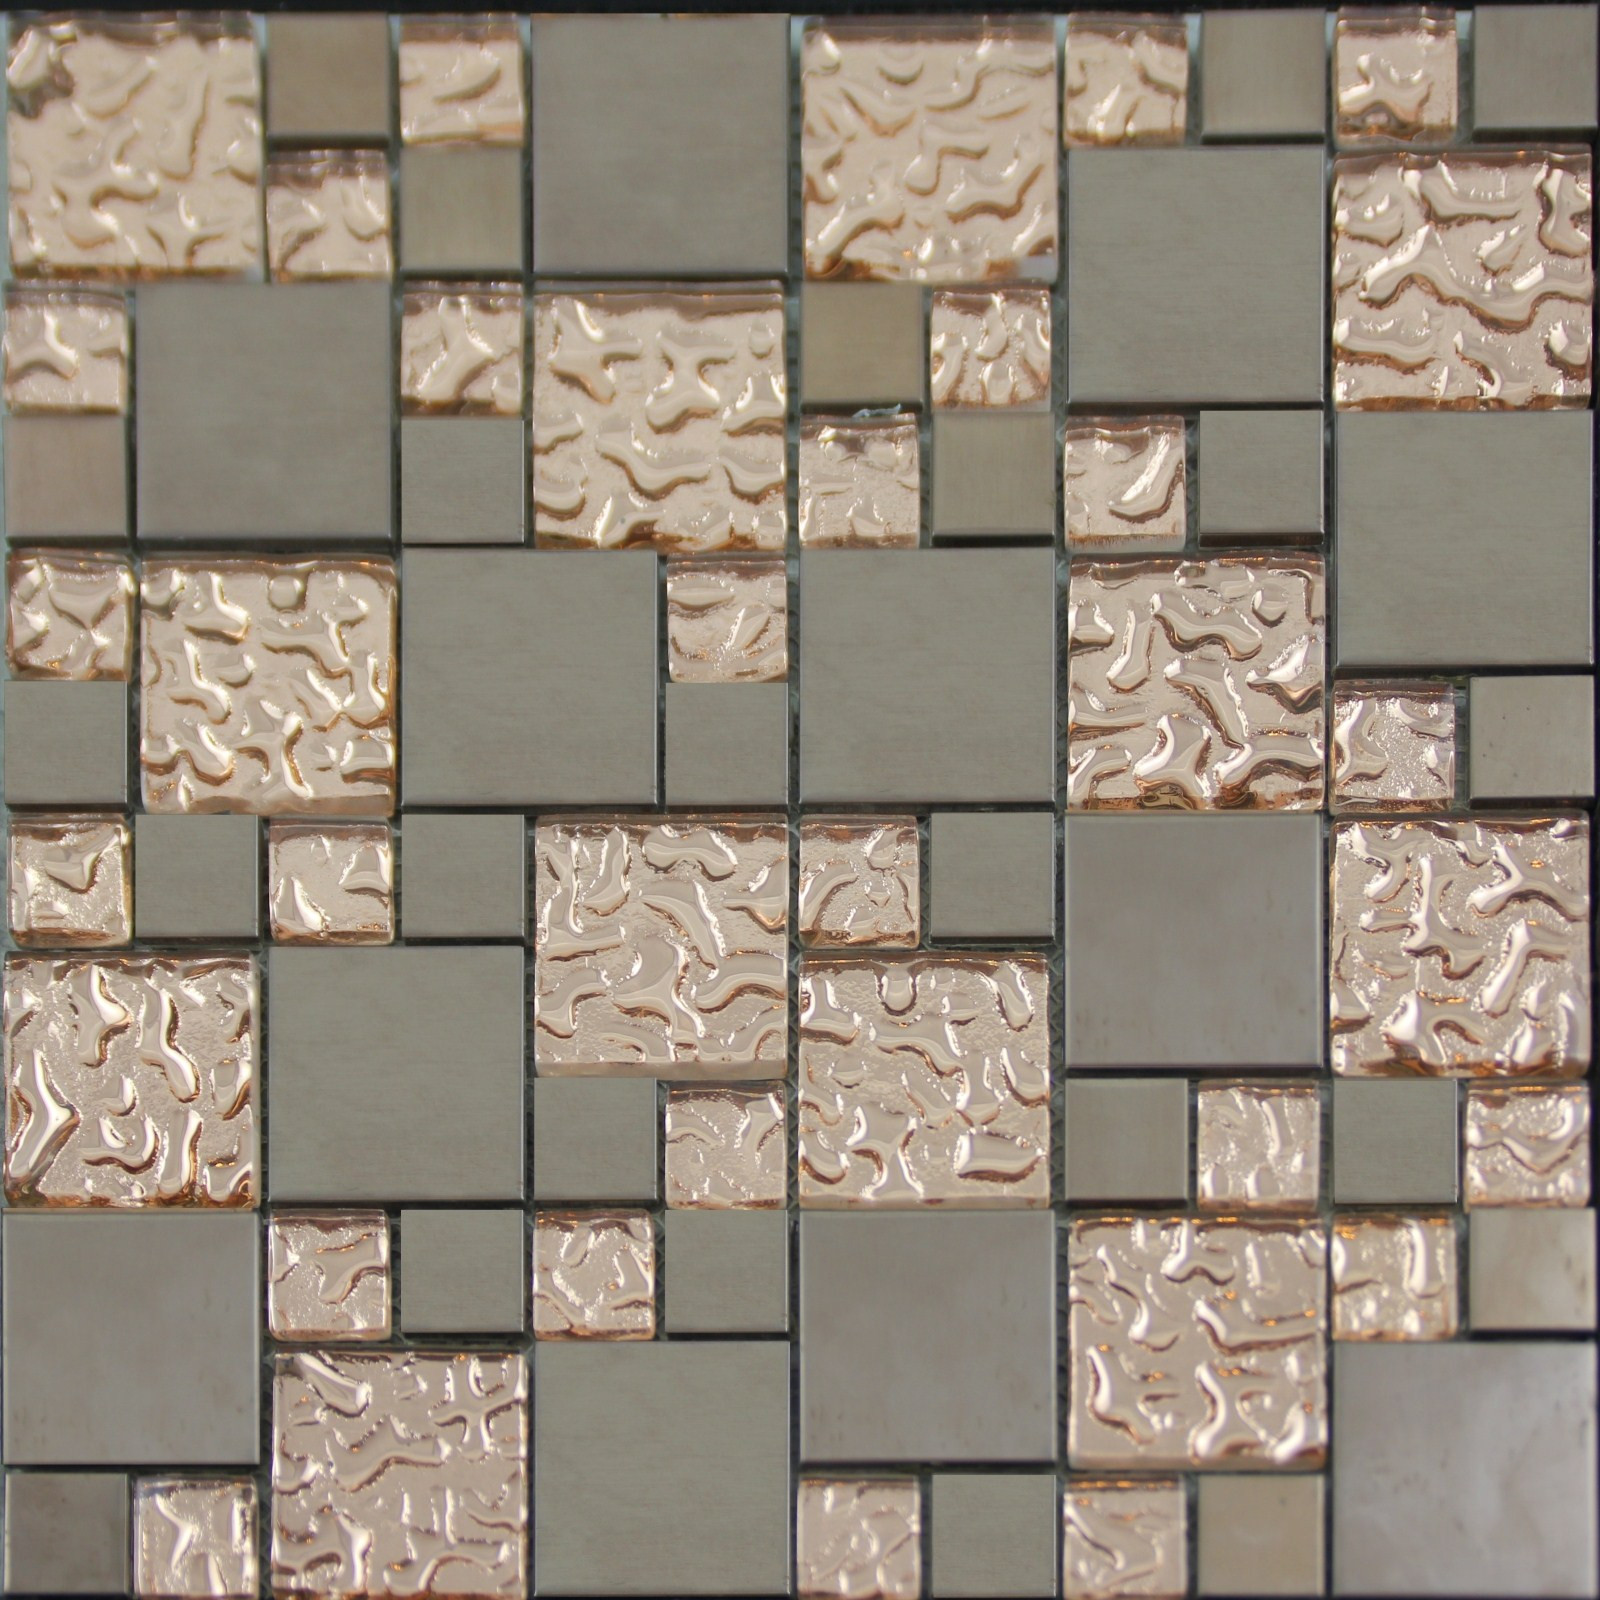 Kitchen Ceramic Wall Tiles
 Copper Glass and Porcelain Square Mosaic Tile Designs